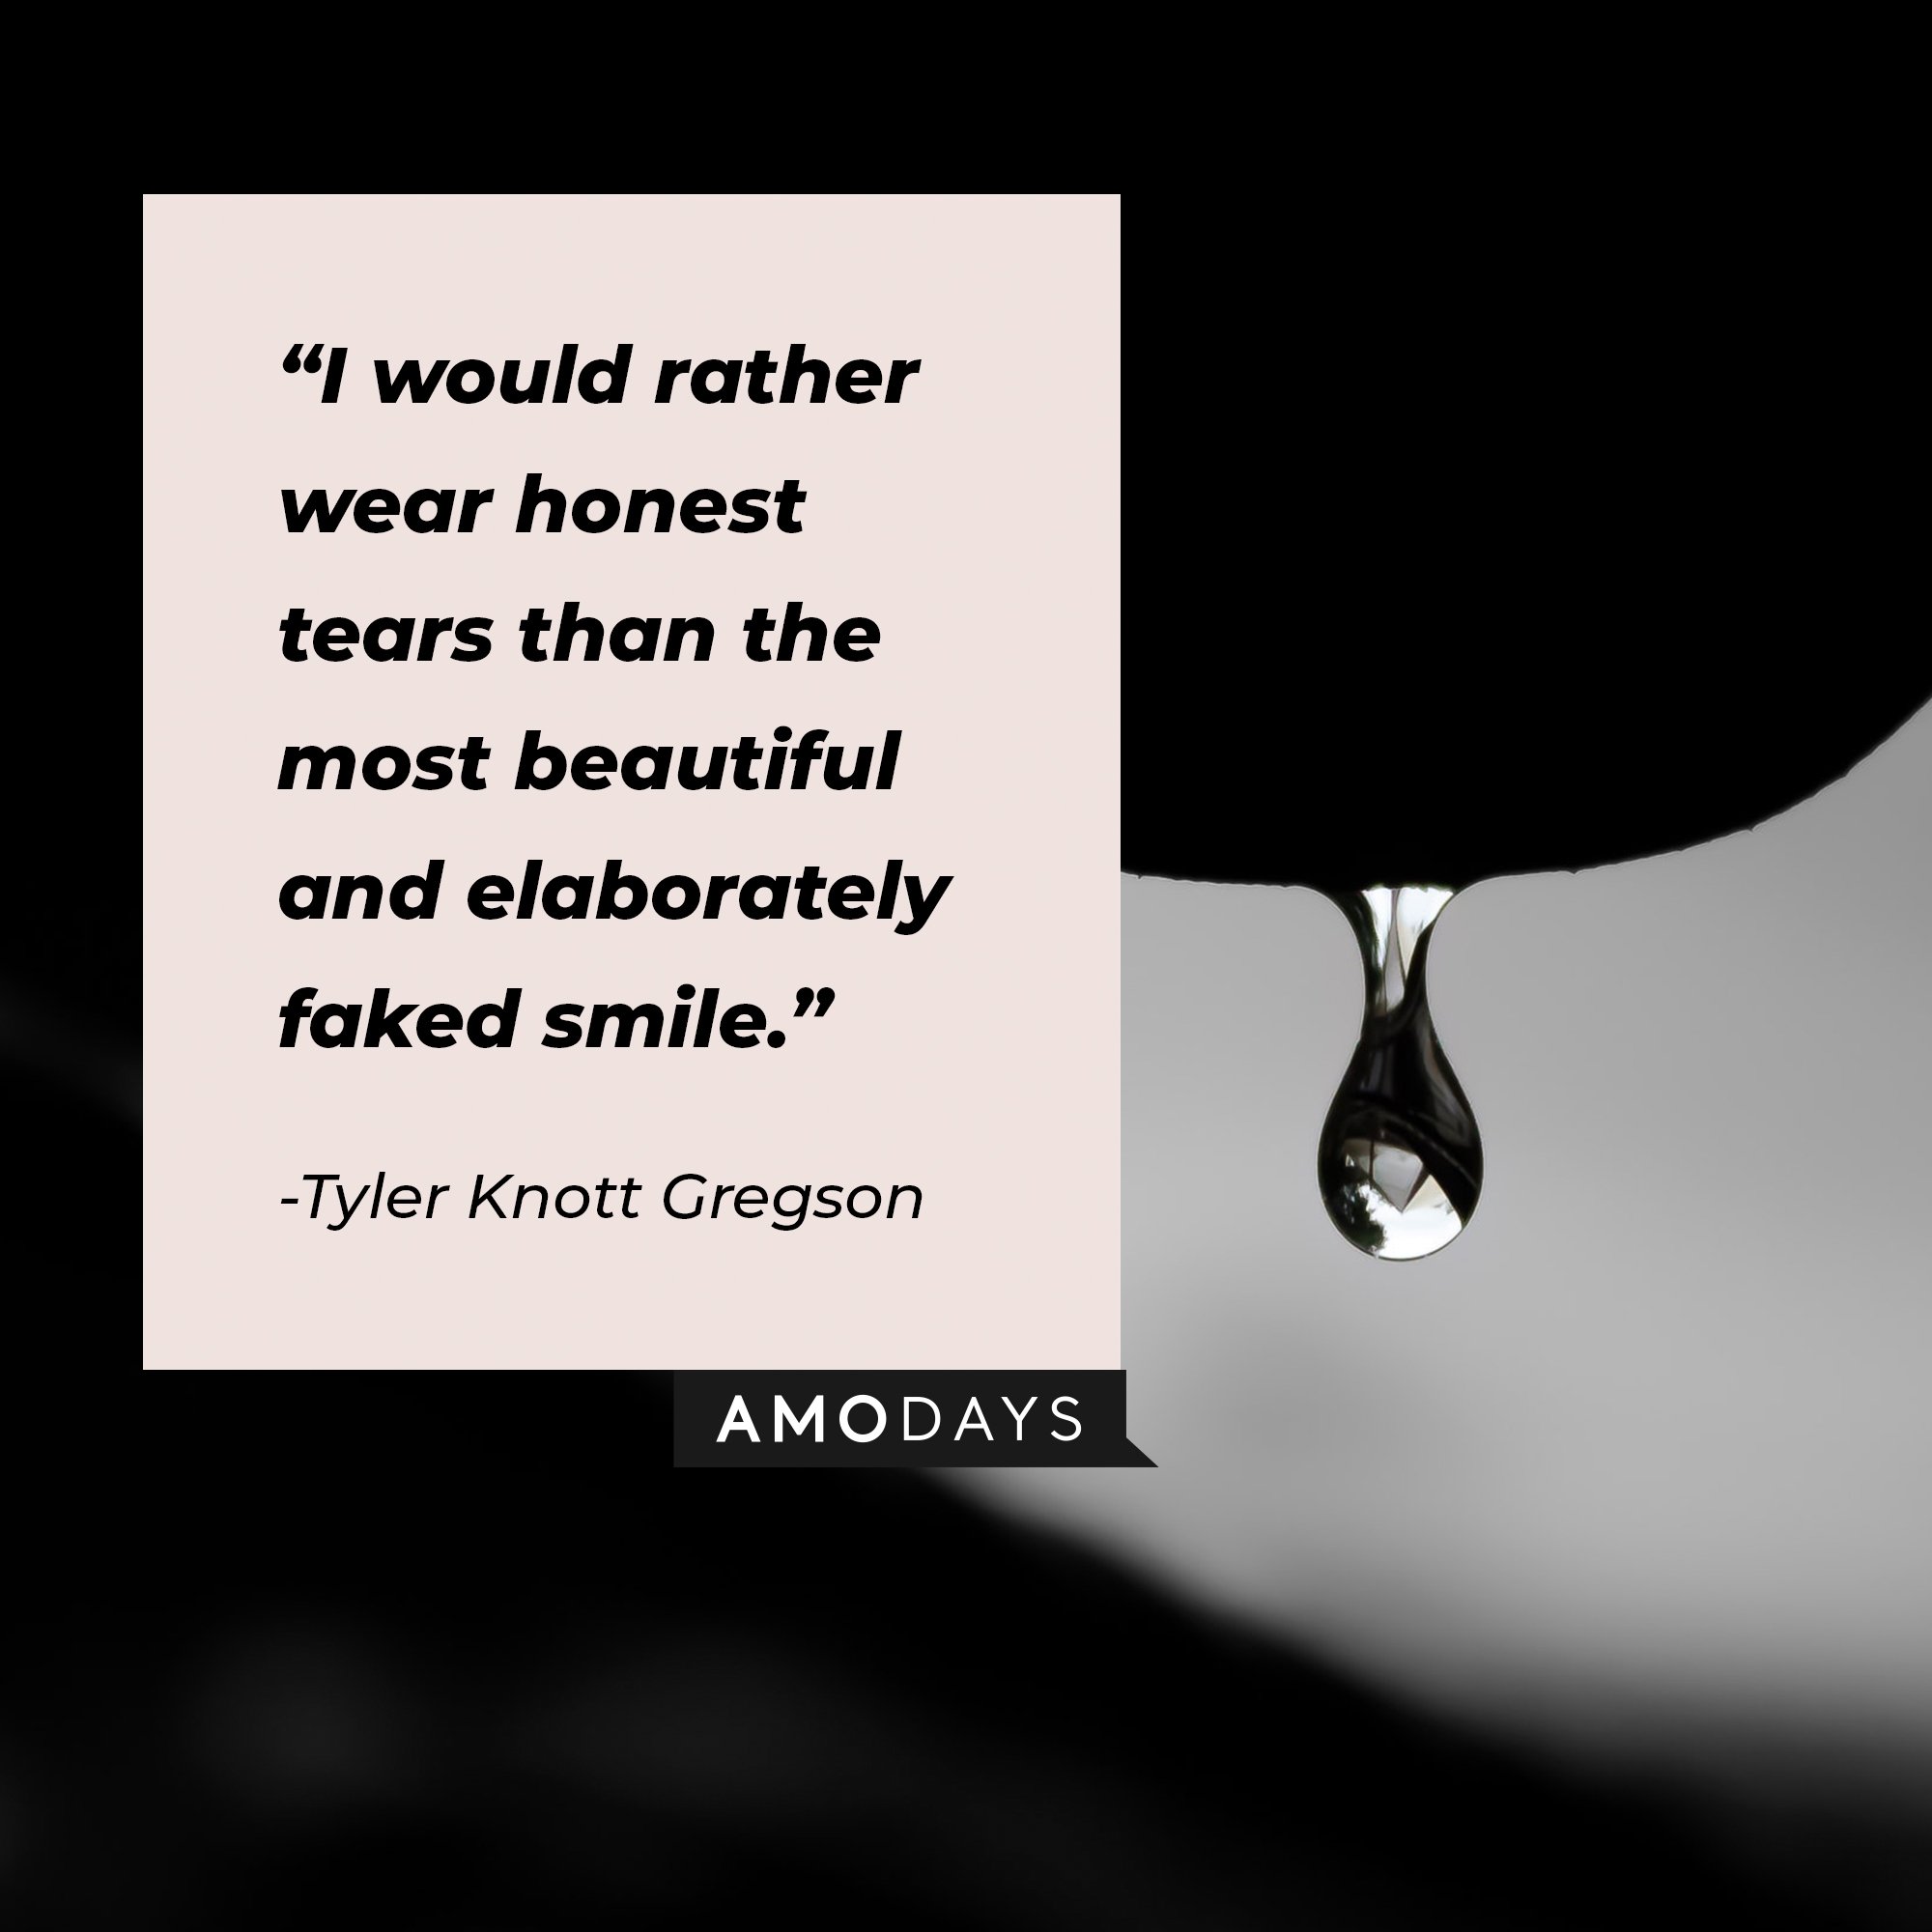 Tyler Knott Gregson’s quote: "I would rather wear honest tears than the most beautiful and elaborately faked smile." | Image: AmoDays